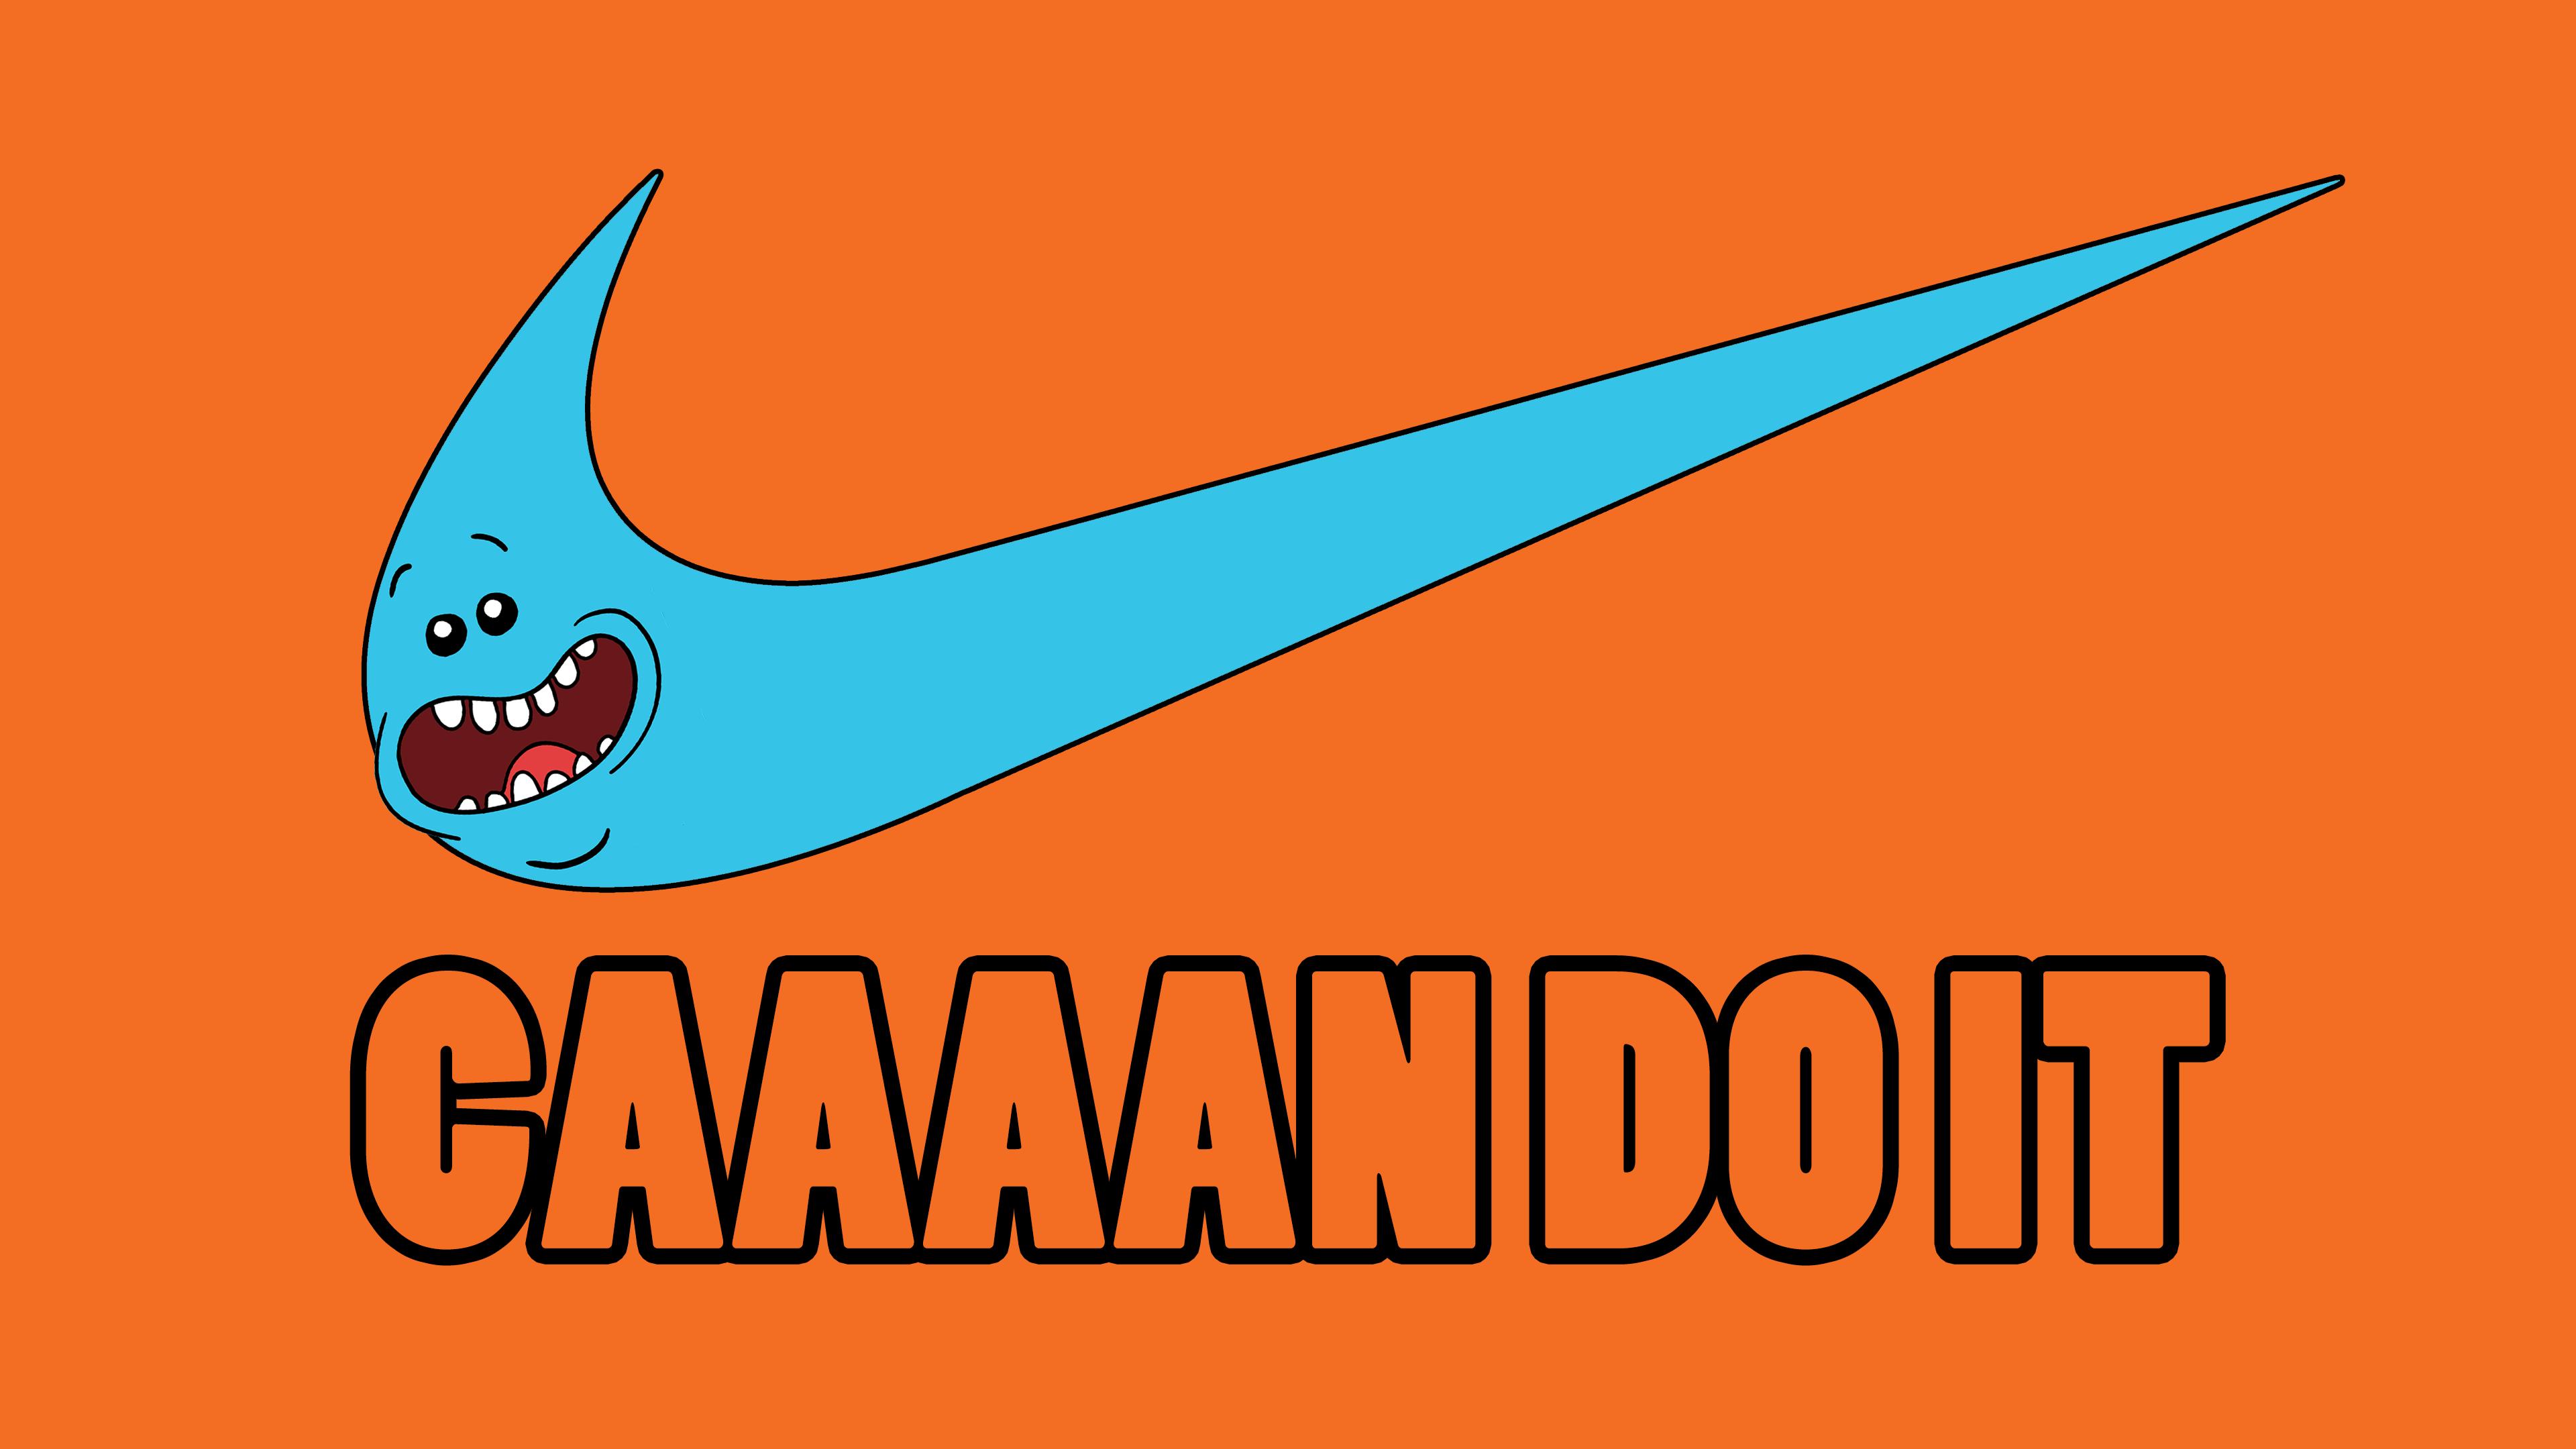 I Made My Own Meeseeks Nike Wallpaper For 4k, 1440p, 1080p